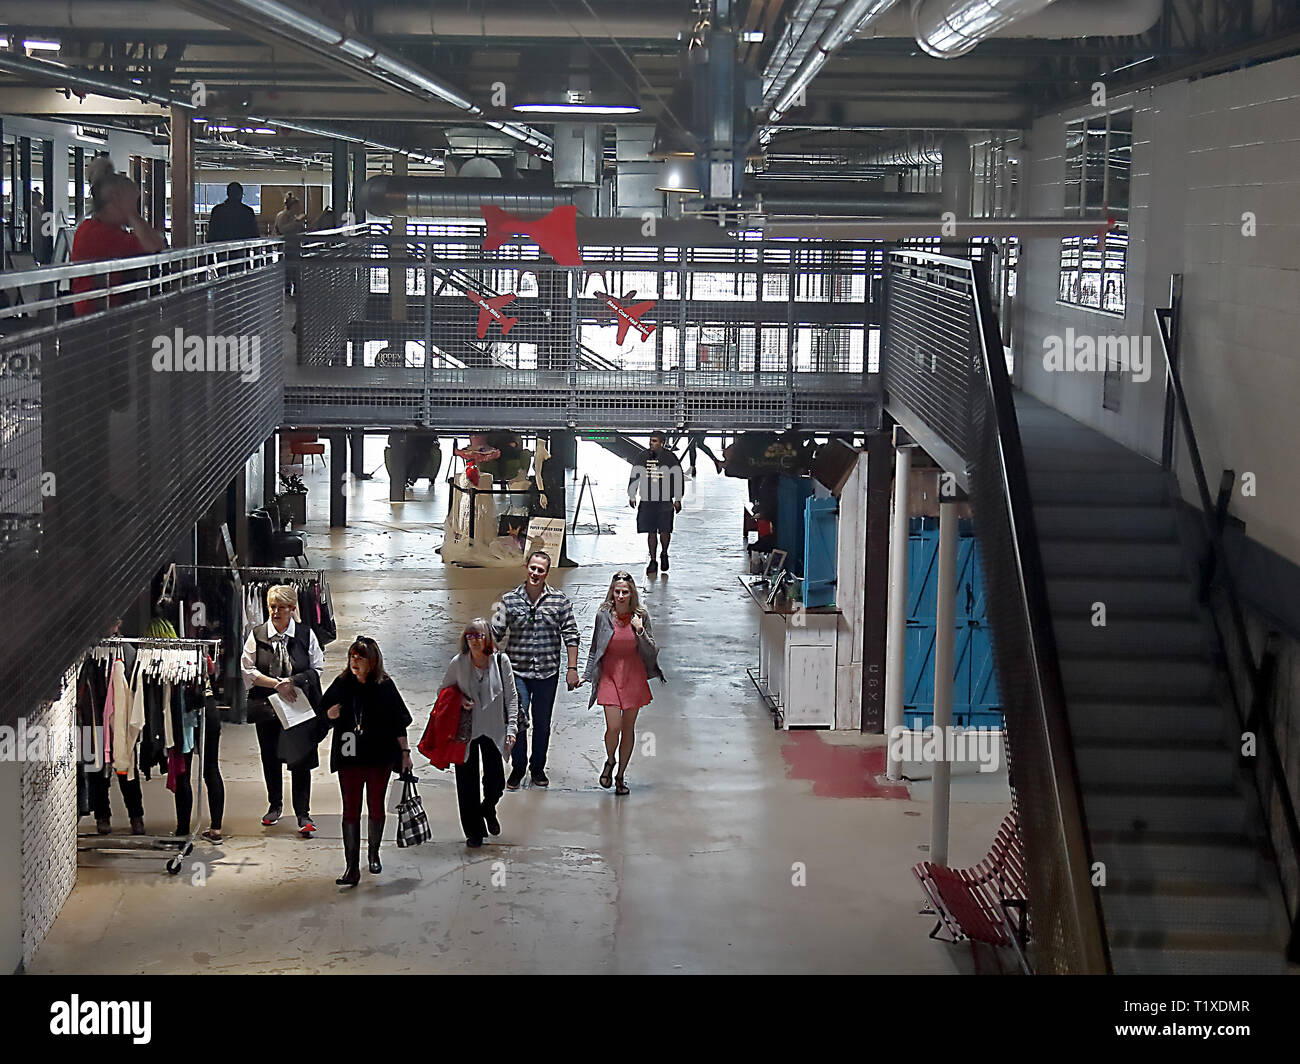 Aurora, Colorado - March 23, 2019: Stanley Marketplace, airy warehouse hangout housing multiple food vendors, along with other retailers and business Stock Photo